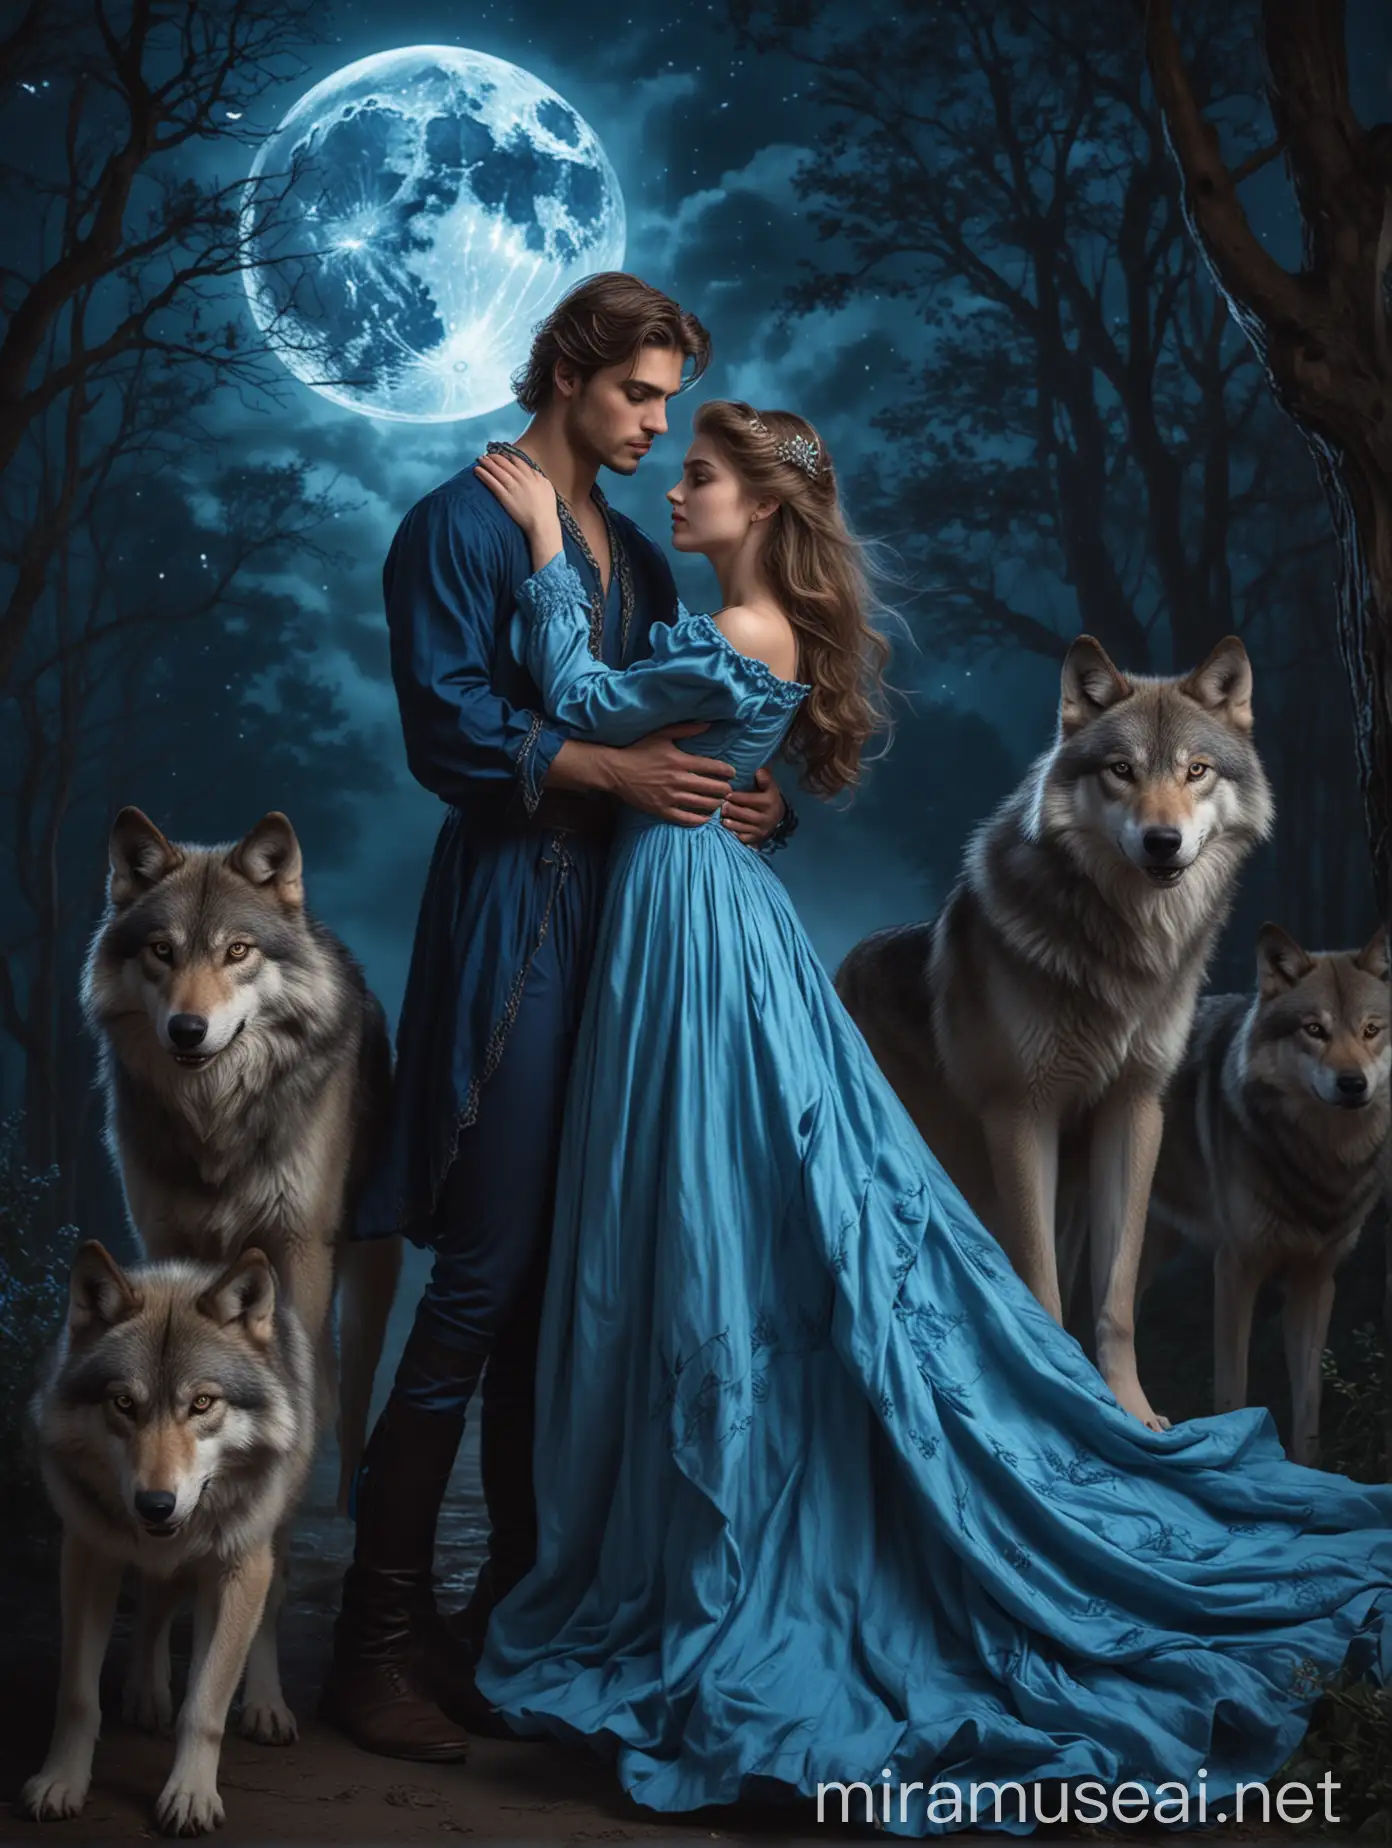 Romantic Couple Embraced by Moonlight with Wolves